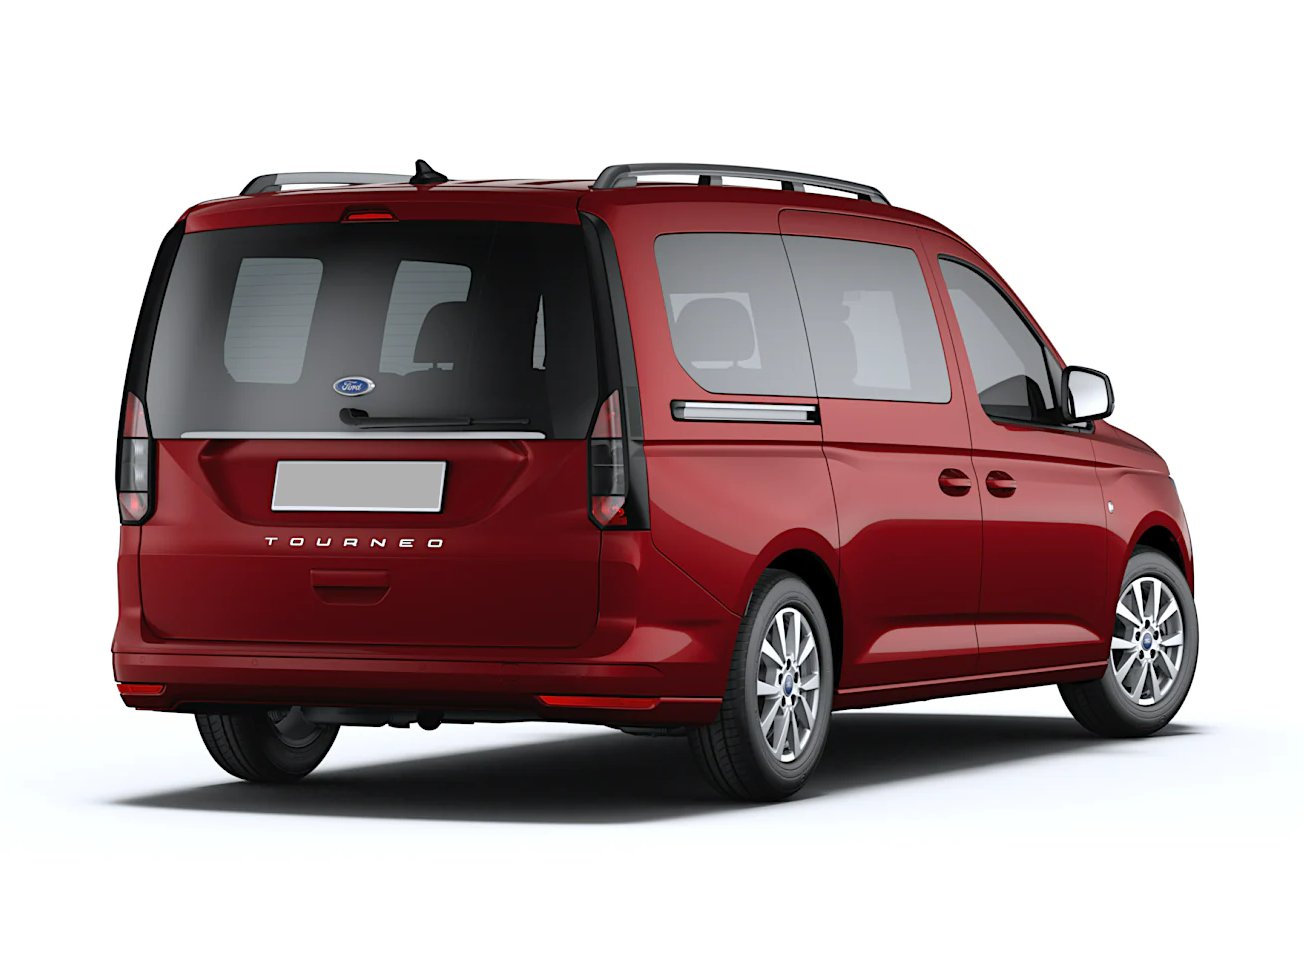 ford-Nouvelle-Grand-Tourneo-Connectgallery_4.png